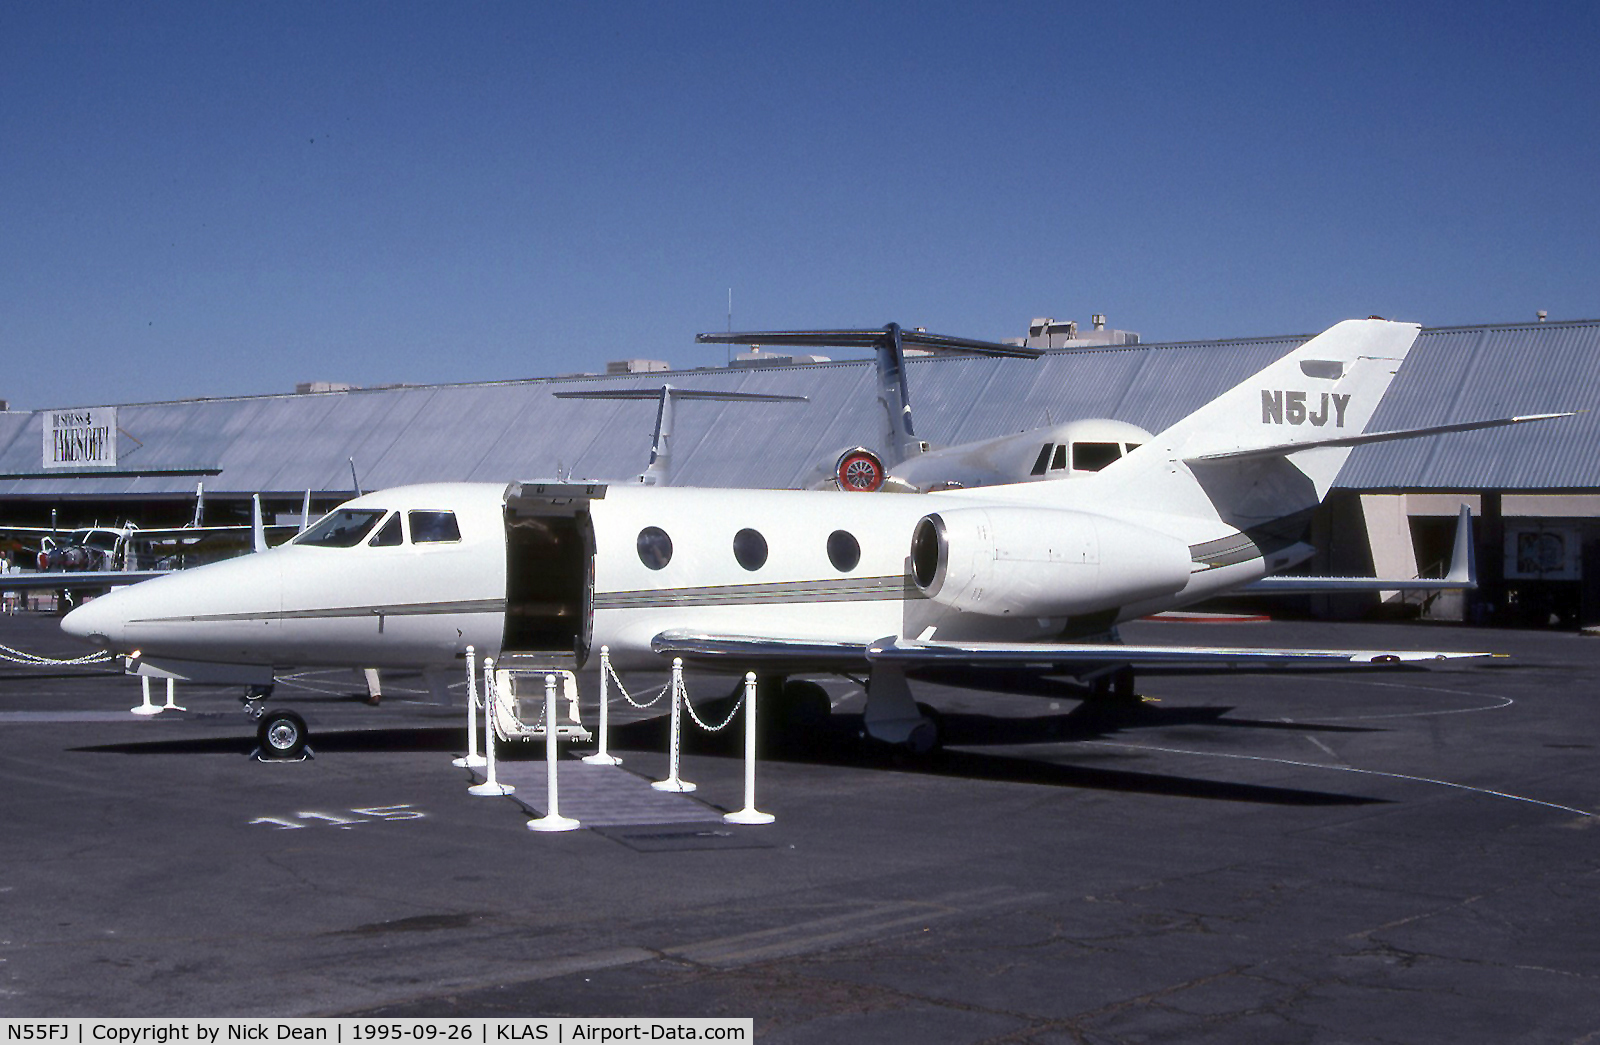 N55FJ, 1976 Dassault Falcon 10 C/N 74, KLAS (Seen here as N5JY at NBAA this aircraft became N55FJ as posted and is now preserved at the Aerospace Museum of California at McLellan CA)